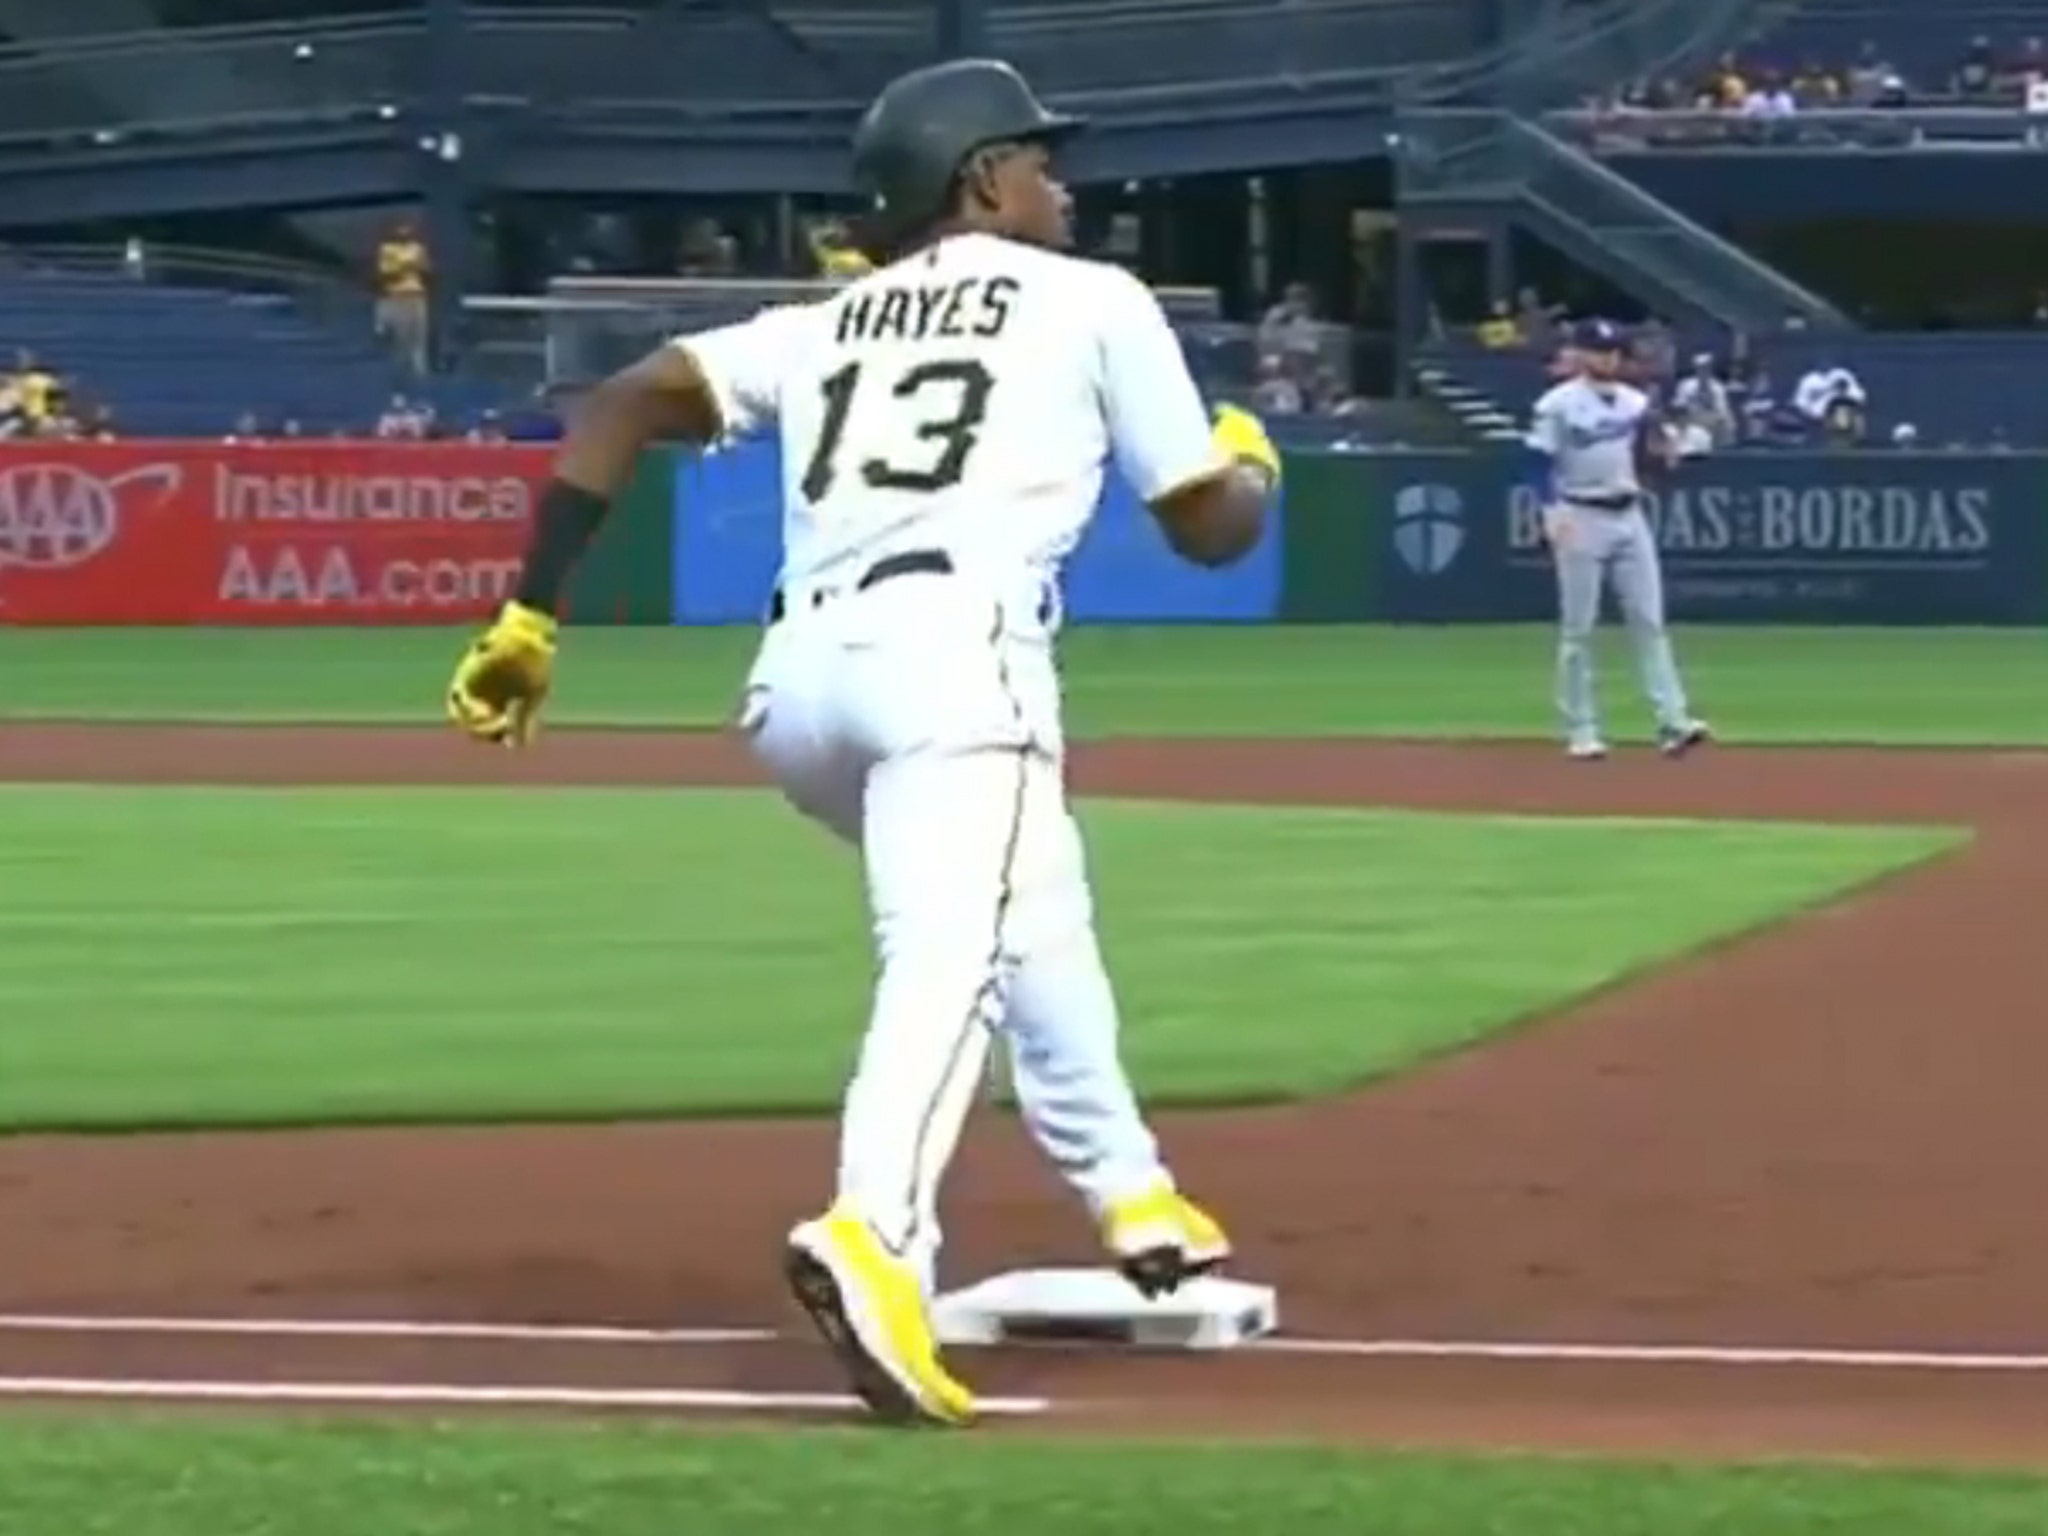 Frustrated' by bothersome back, Pirates 3B Ke'Bryan Hayes denies